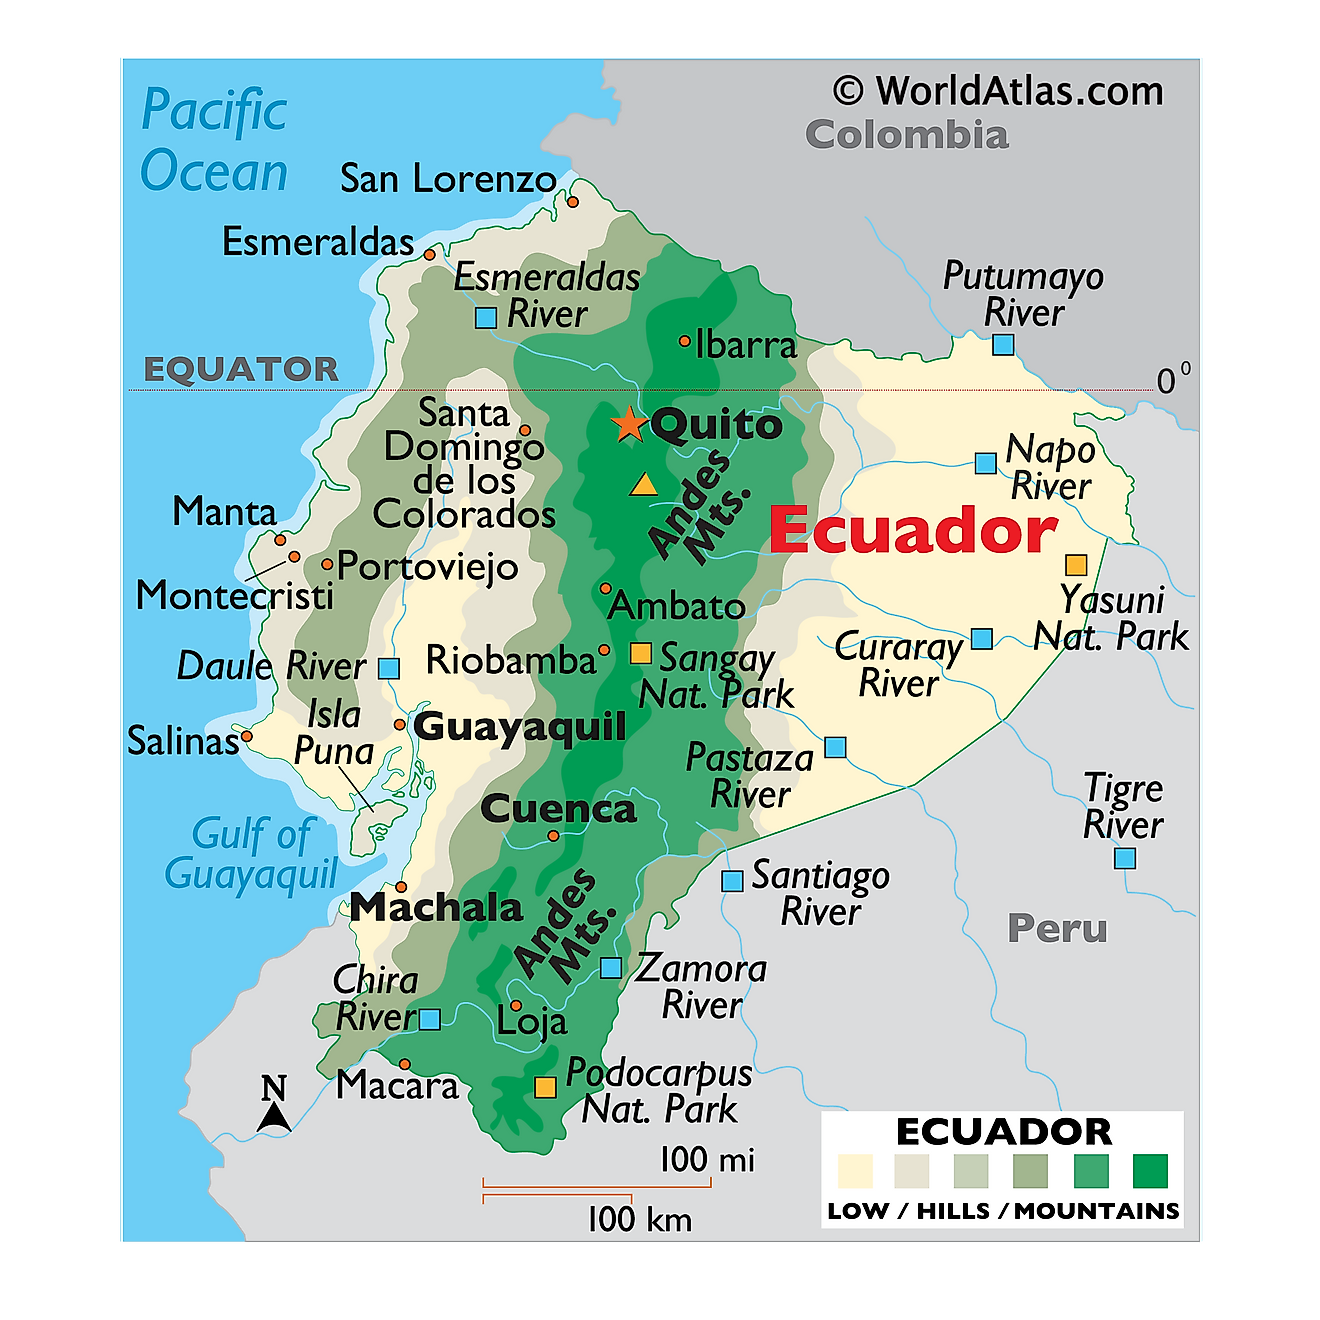 Physical Map of Ecuador showing relief, rivers, mountains ranges, important cities, bordering countries, and more.